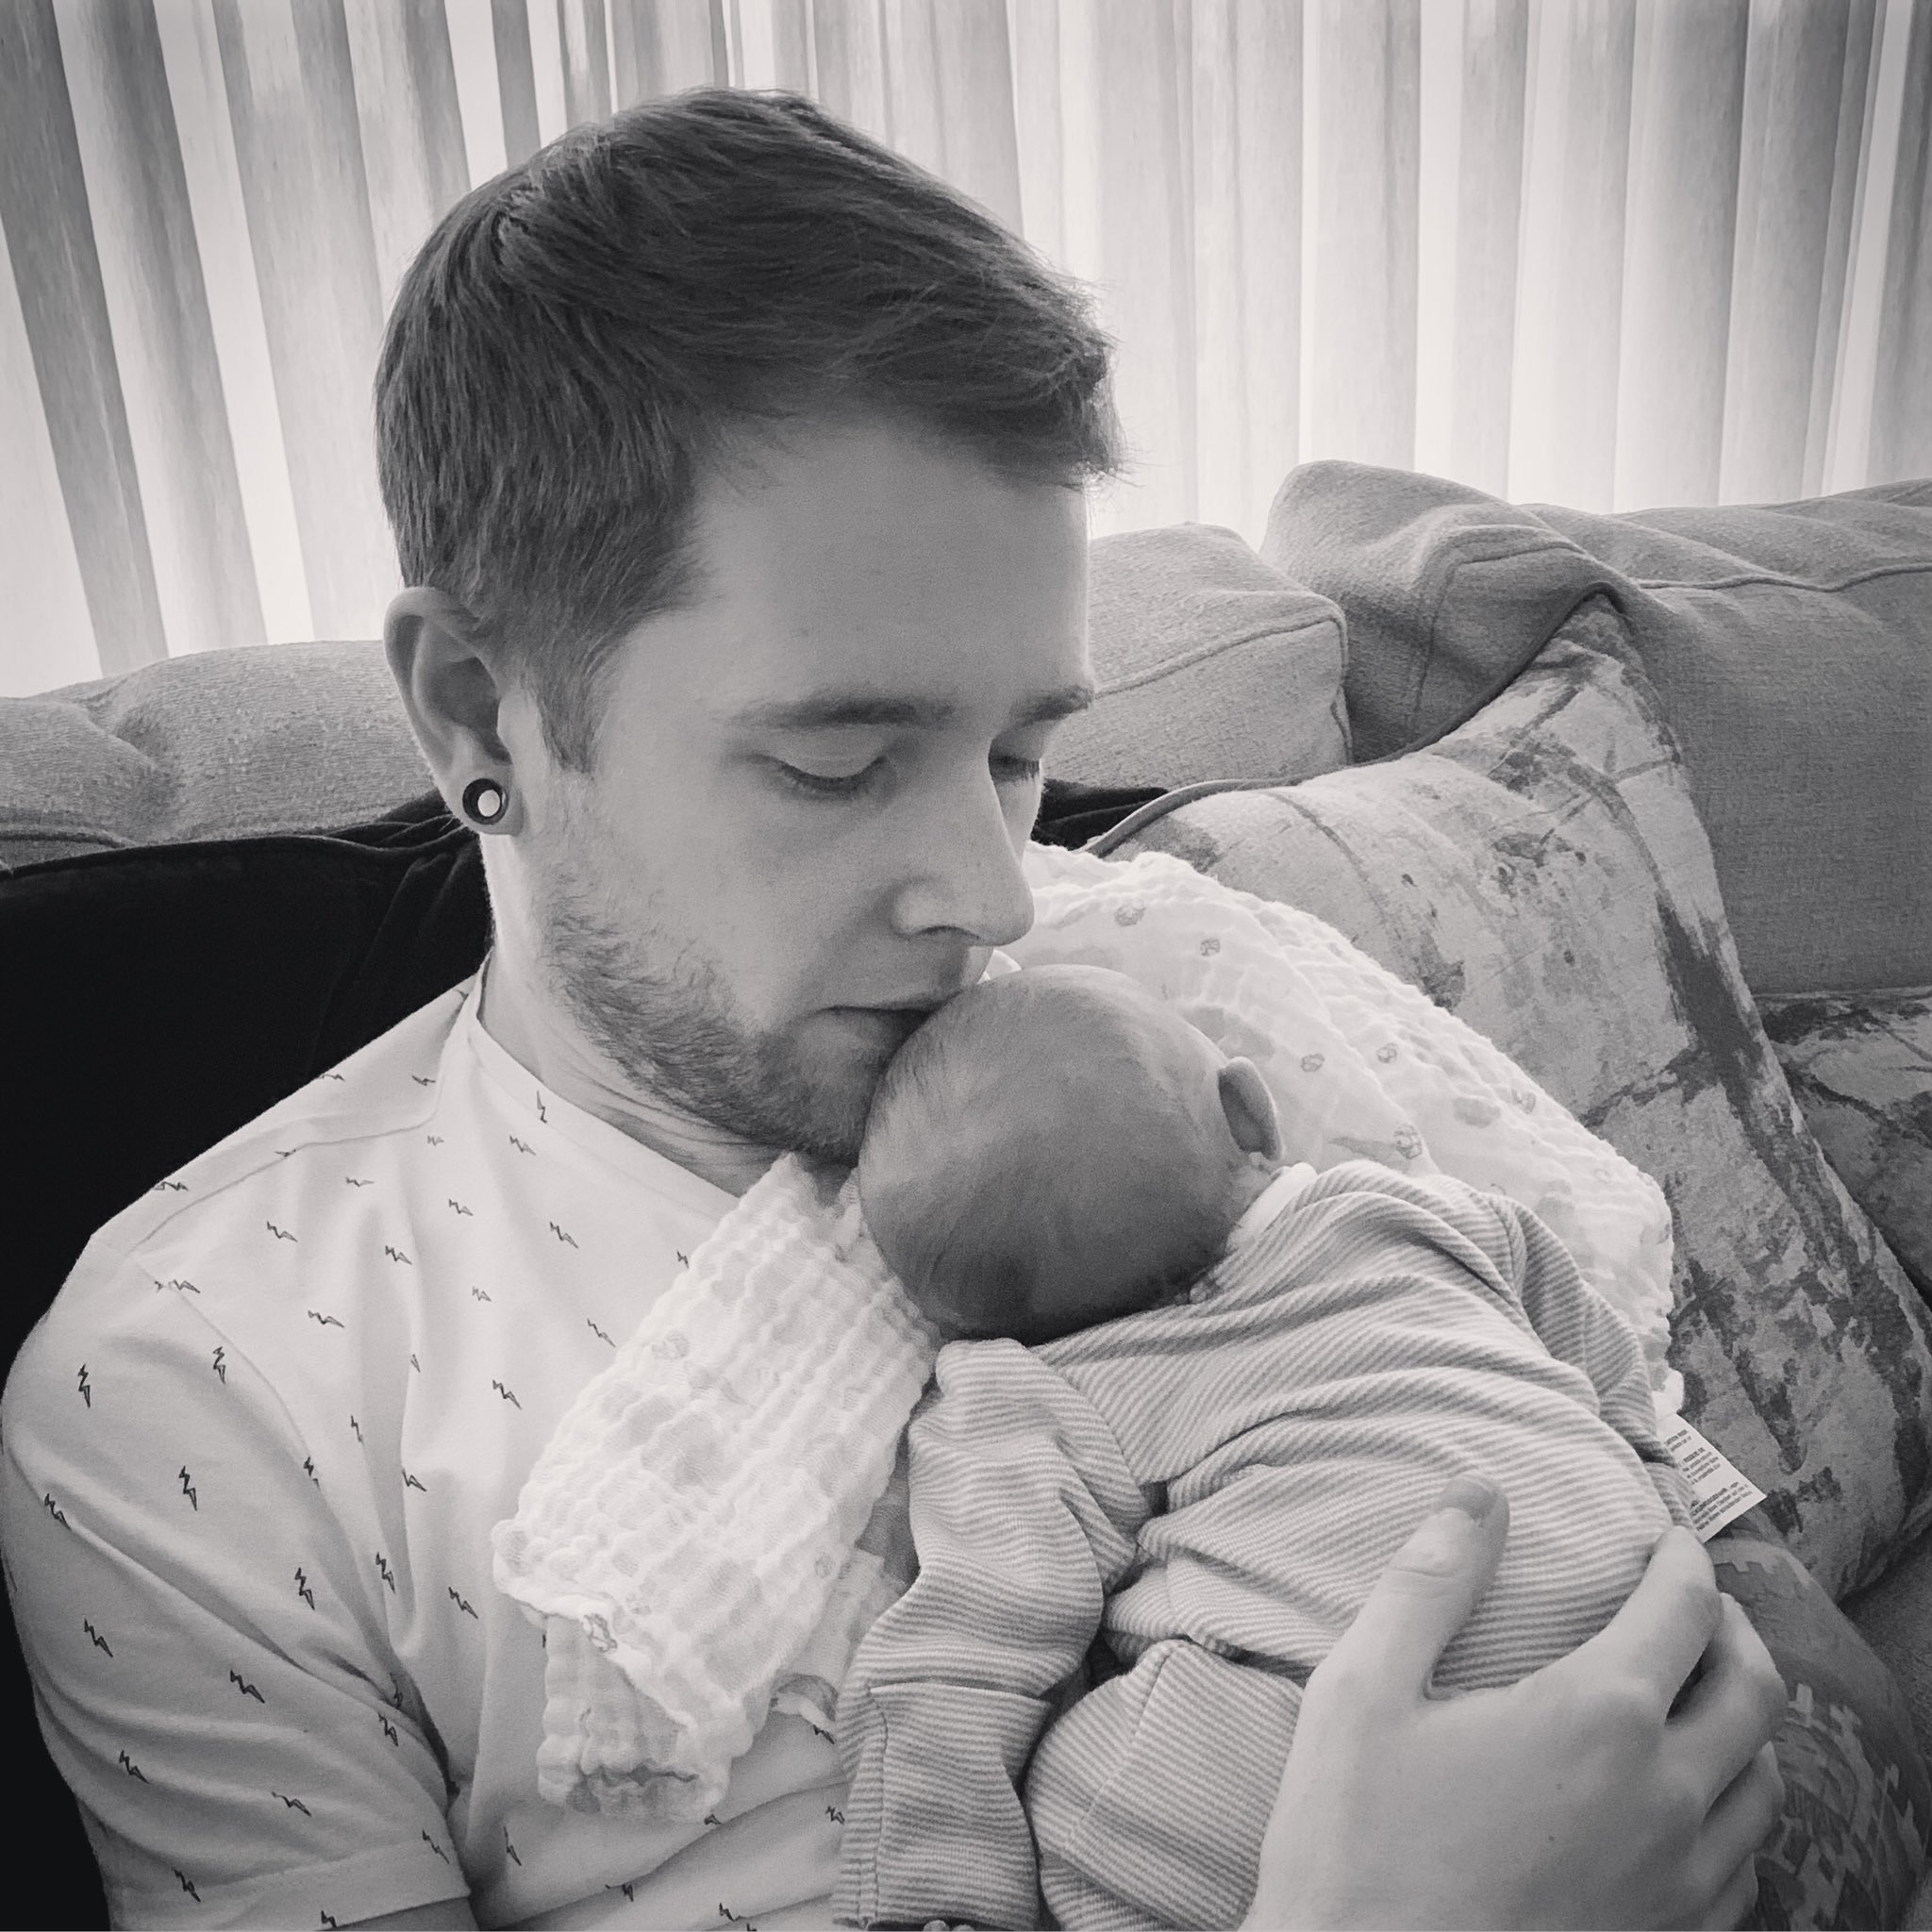 ᴅᴀɴᴛᴅᴍ💎 on Twitter: "Asher Middleton was born on the 5th January 2020. We  couldn't be happier. We have made the decision not to show his face  anywhere online so please respect our